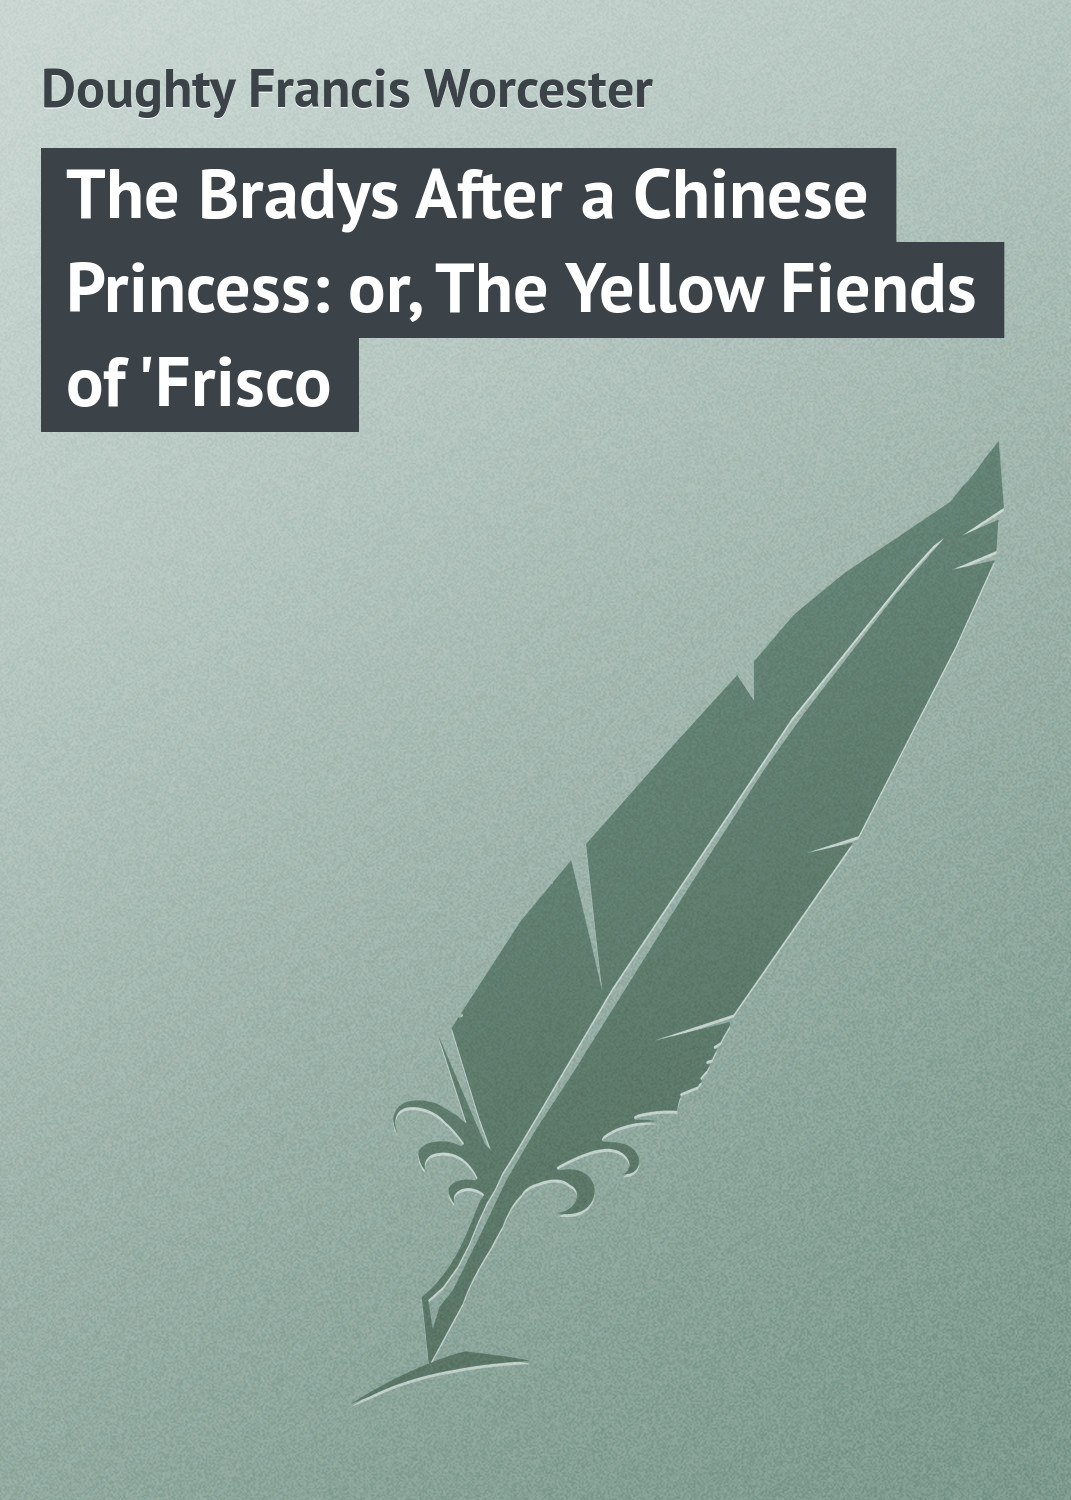 The Bradys After a Chinese Princess: or, The Yellow Fiends of'Frisco